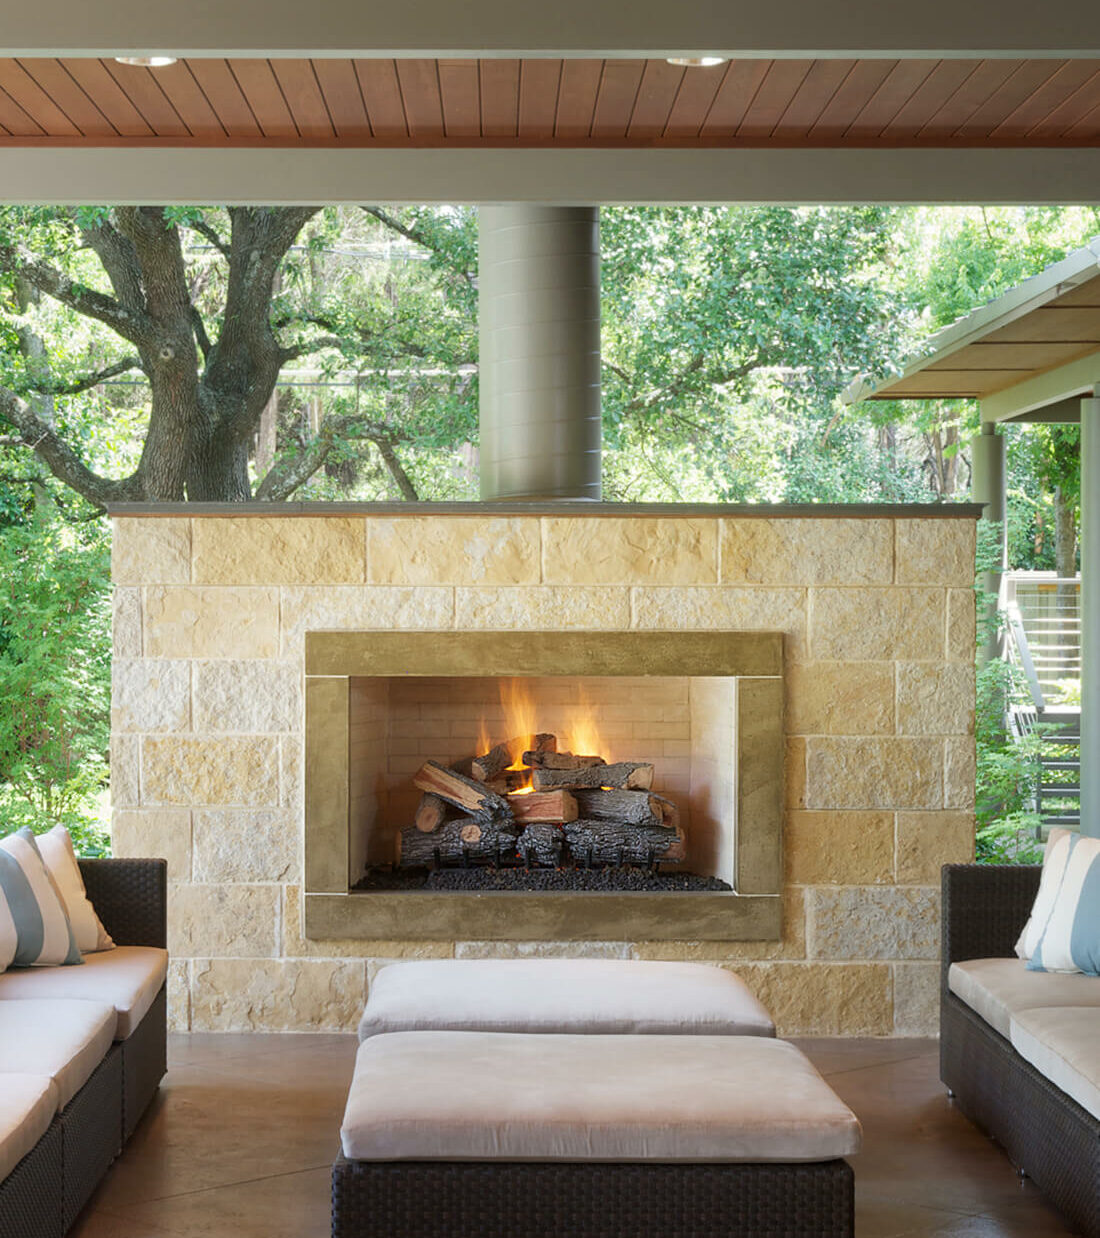 Preston-Hollow-Outdoor-Living-Space-Native-Plant-Landscaping-Bonick